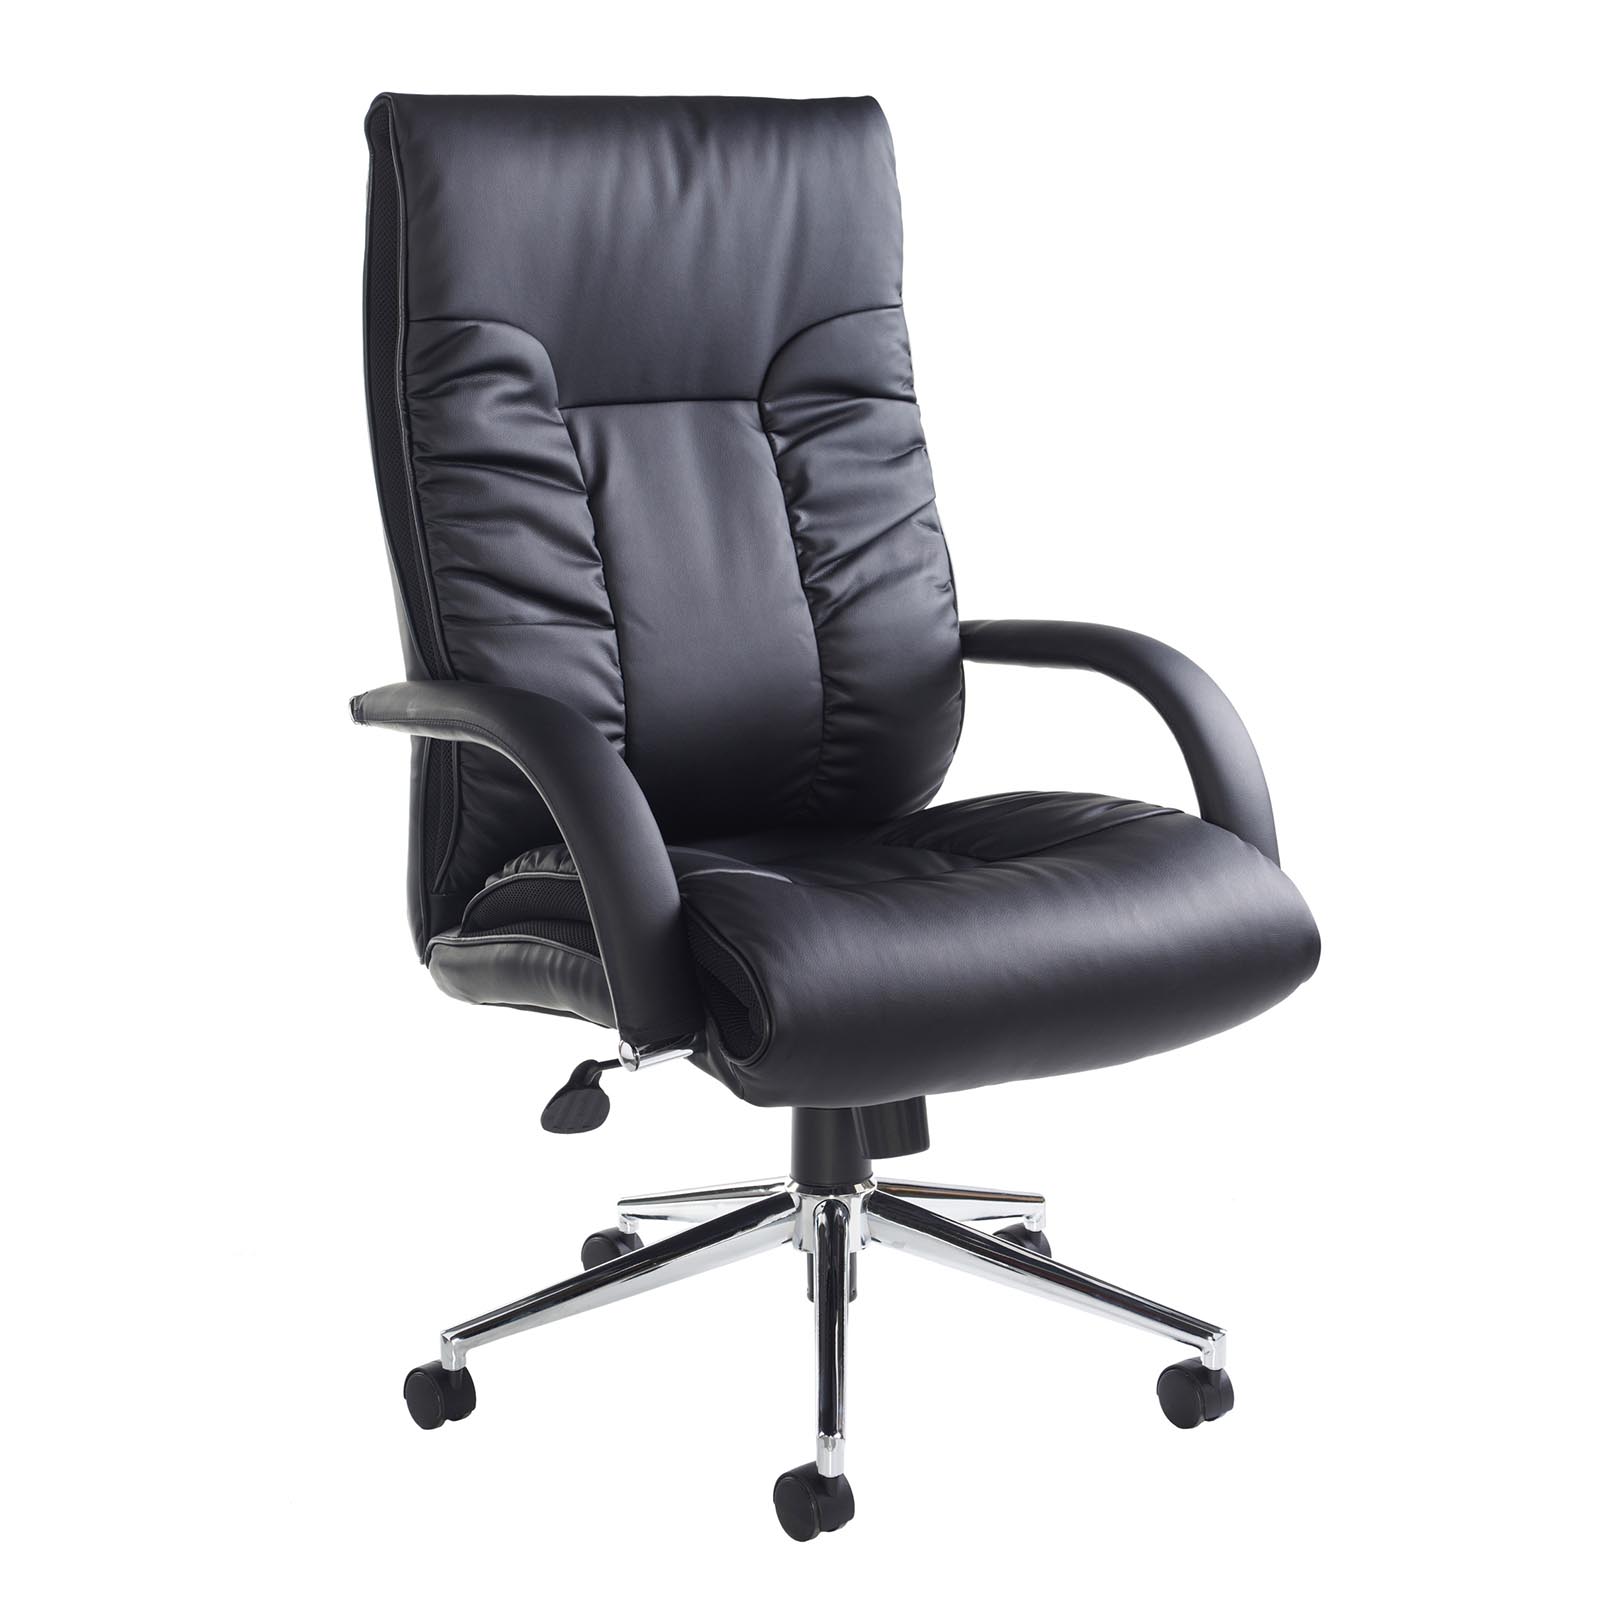 Derby high back executive chair - black faux leather